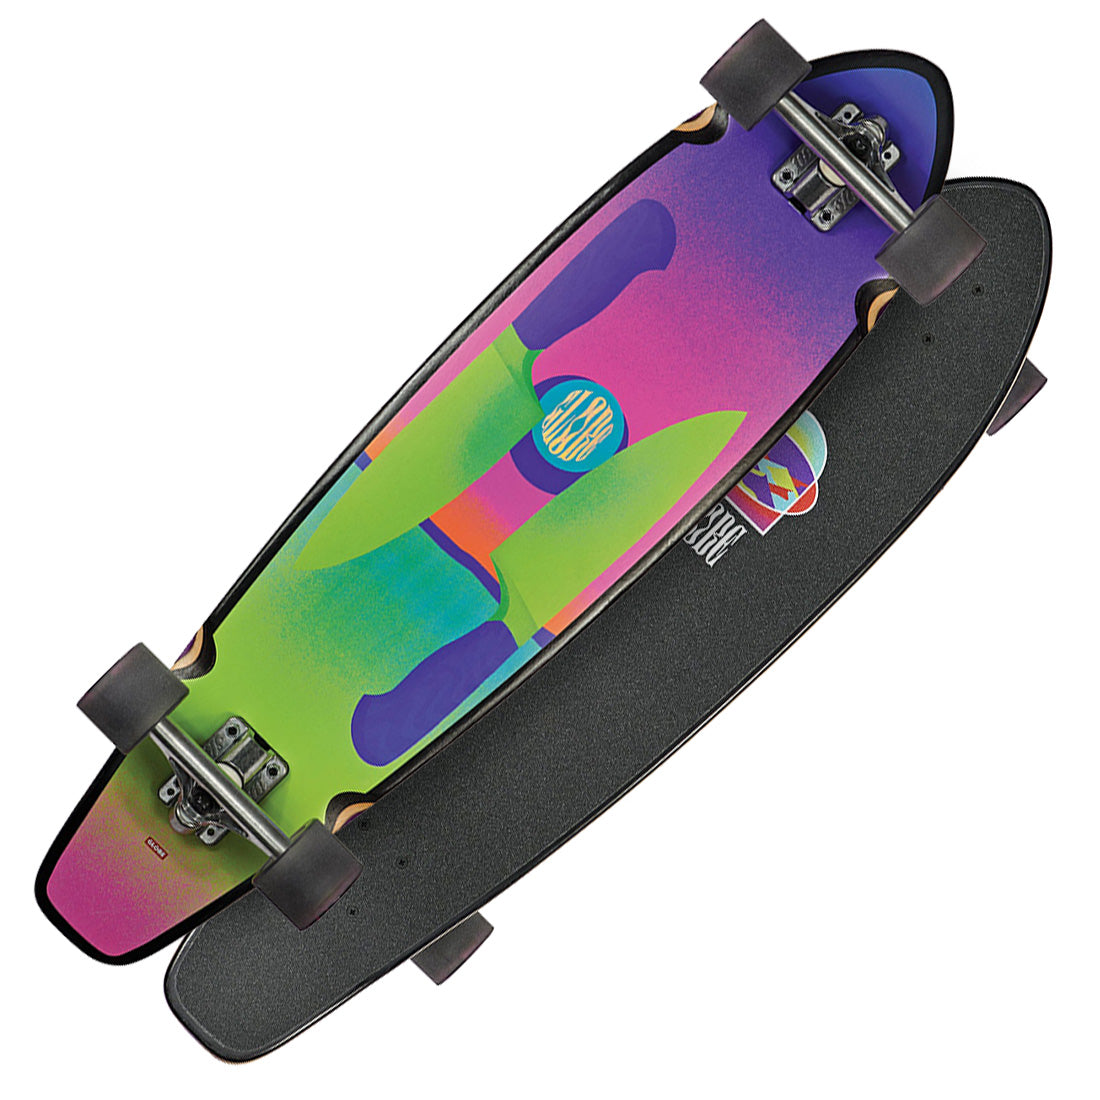 Globe The All-Time 35 Complete - Sharps On The Brain Skateboard Completes Longboards